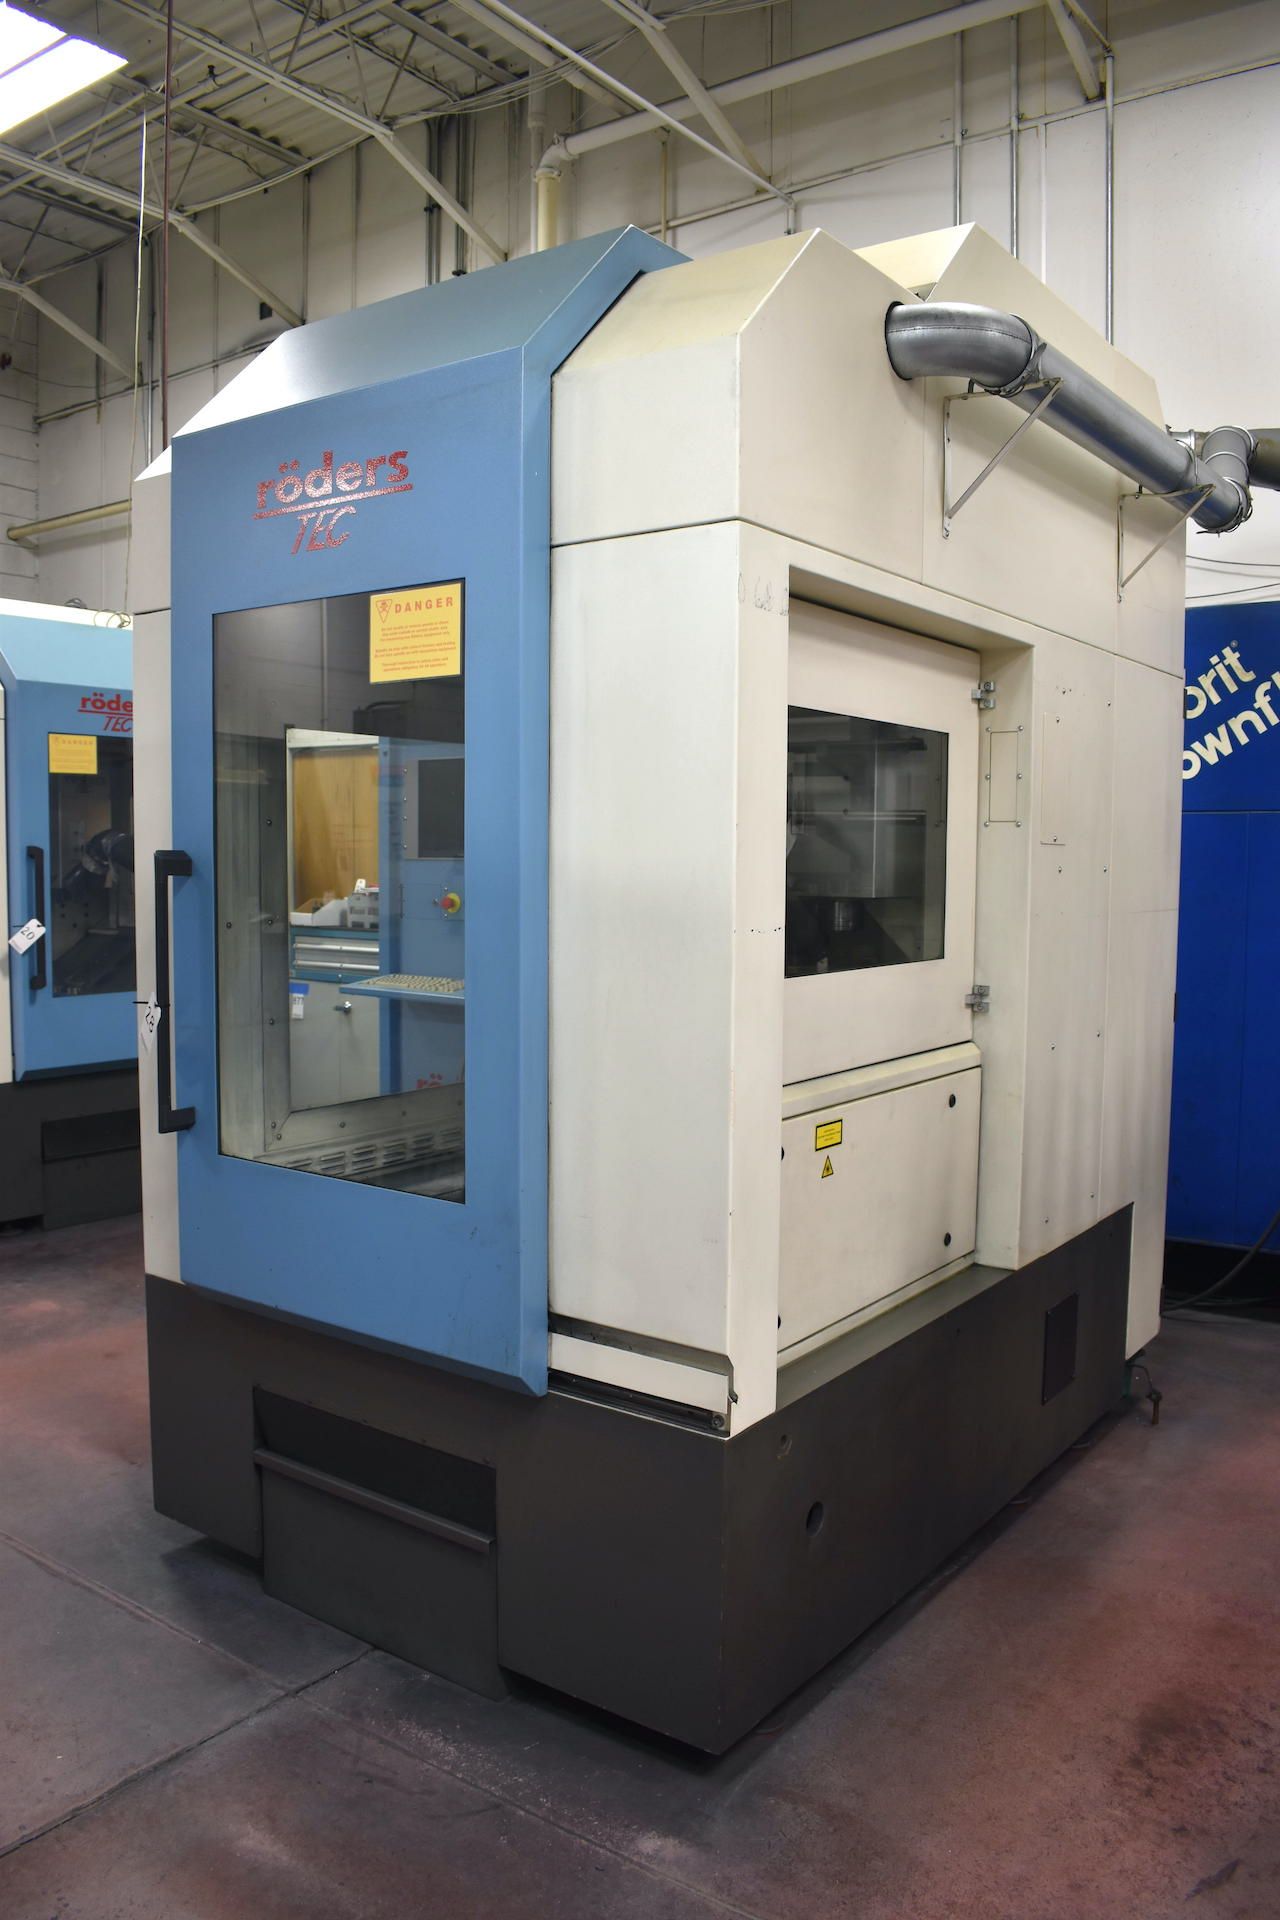 2000 Roders Tec Model RFM 760/2 High Speed Vertical Machining Center, S/N 88532-93, Automatic Tool - Image 6 of 8